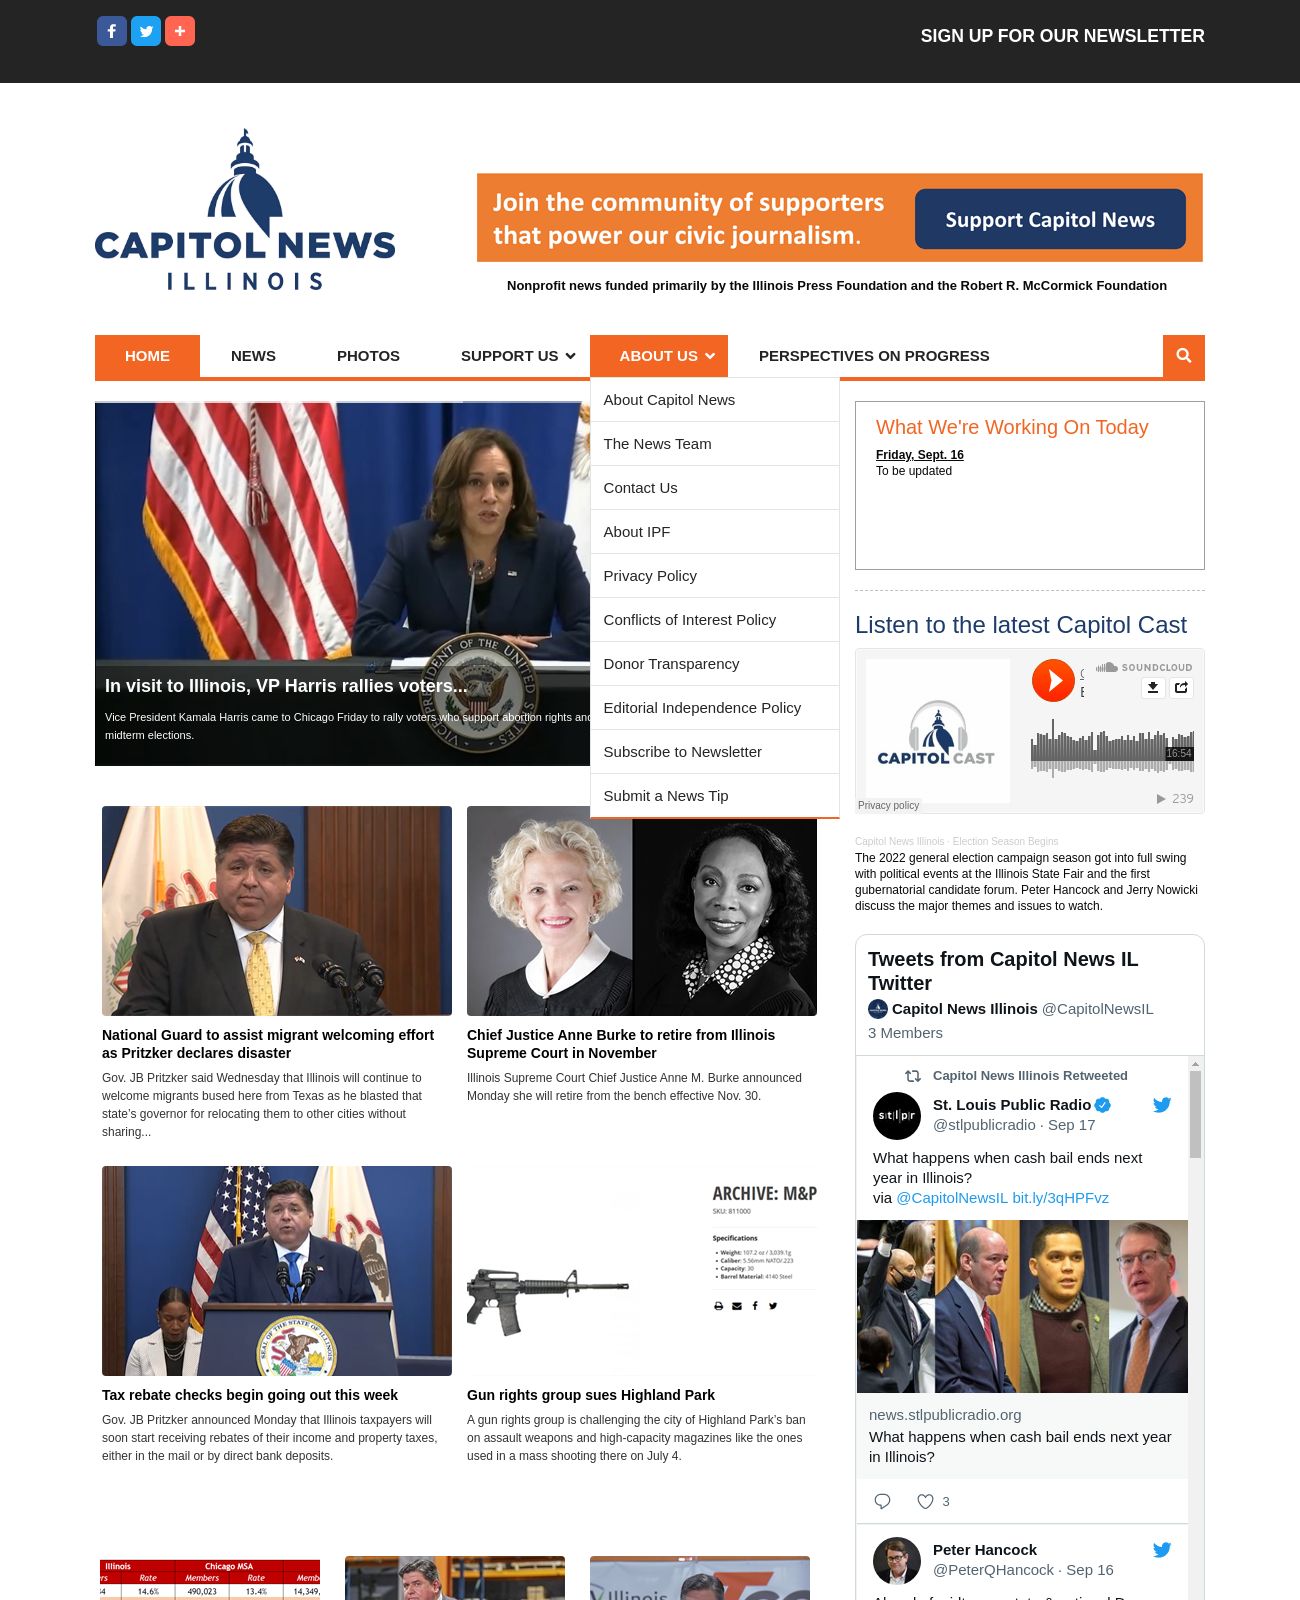 Capitol News Illinois at 2022-09-19 05:51:42-05:00 local time